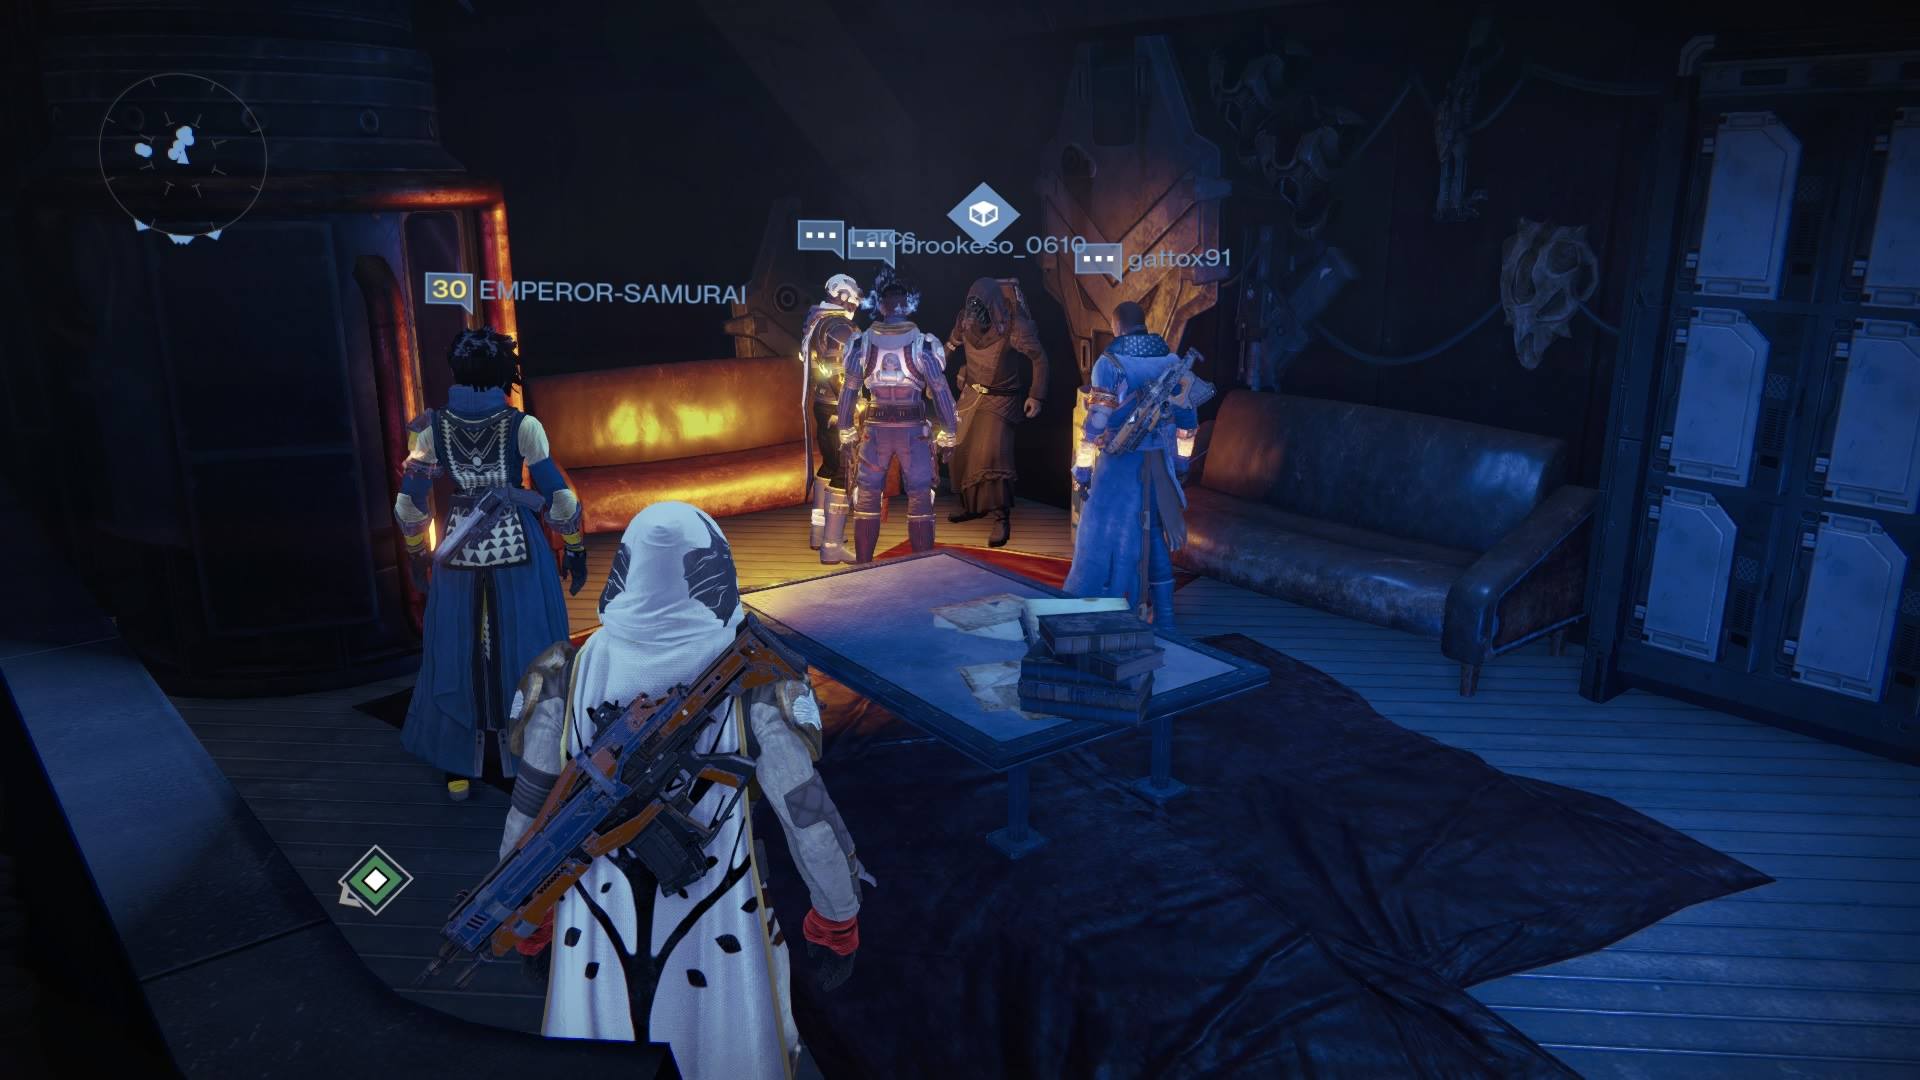 Xur – Agent of the Nine can be found in the Tower Hangar Lounge